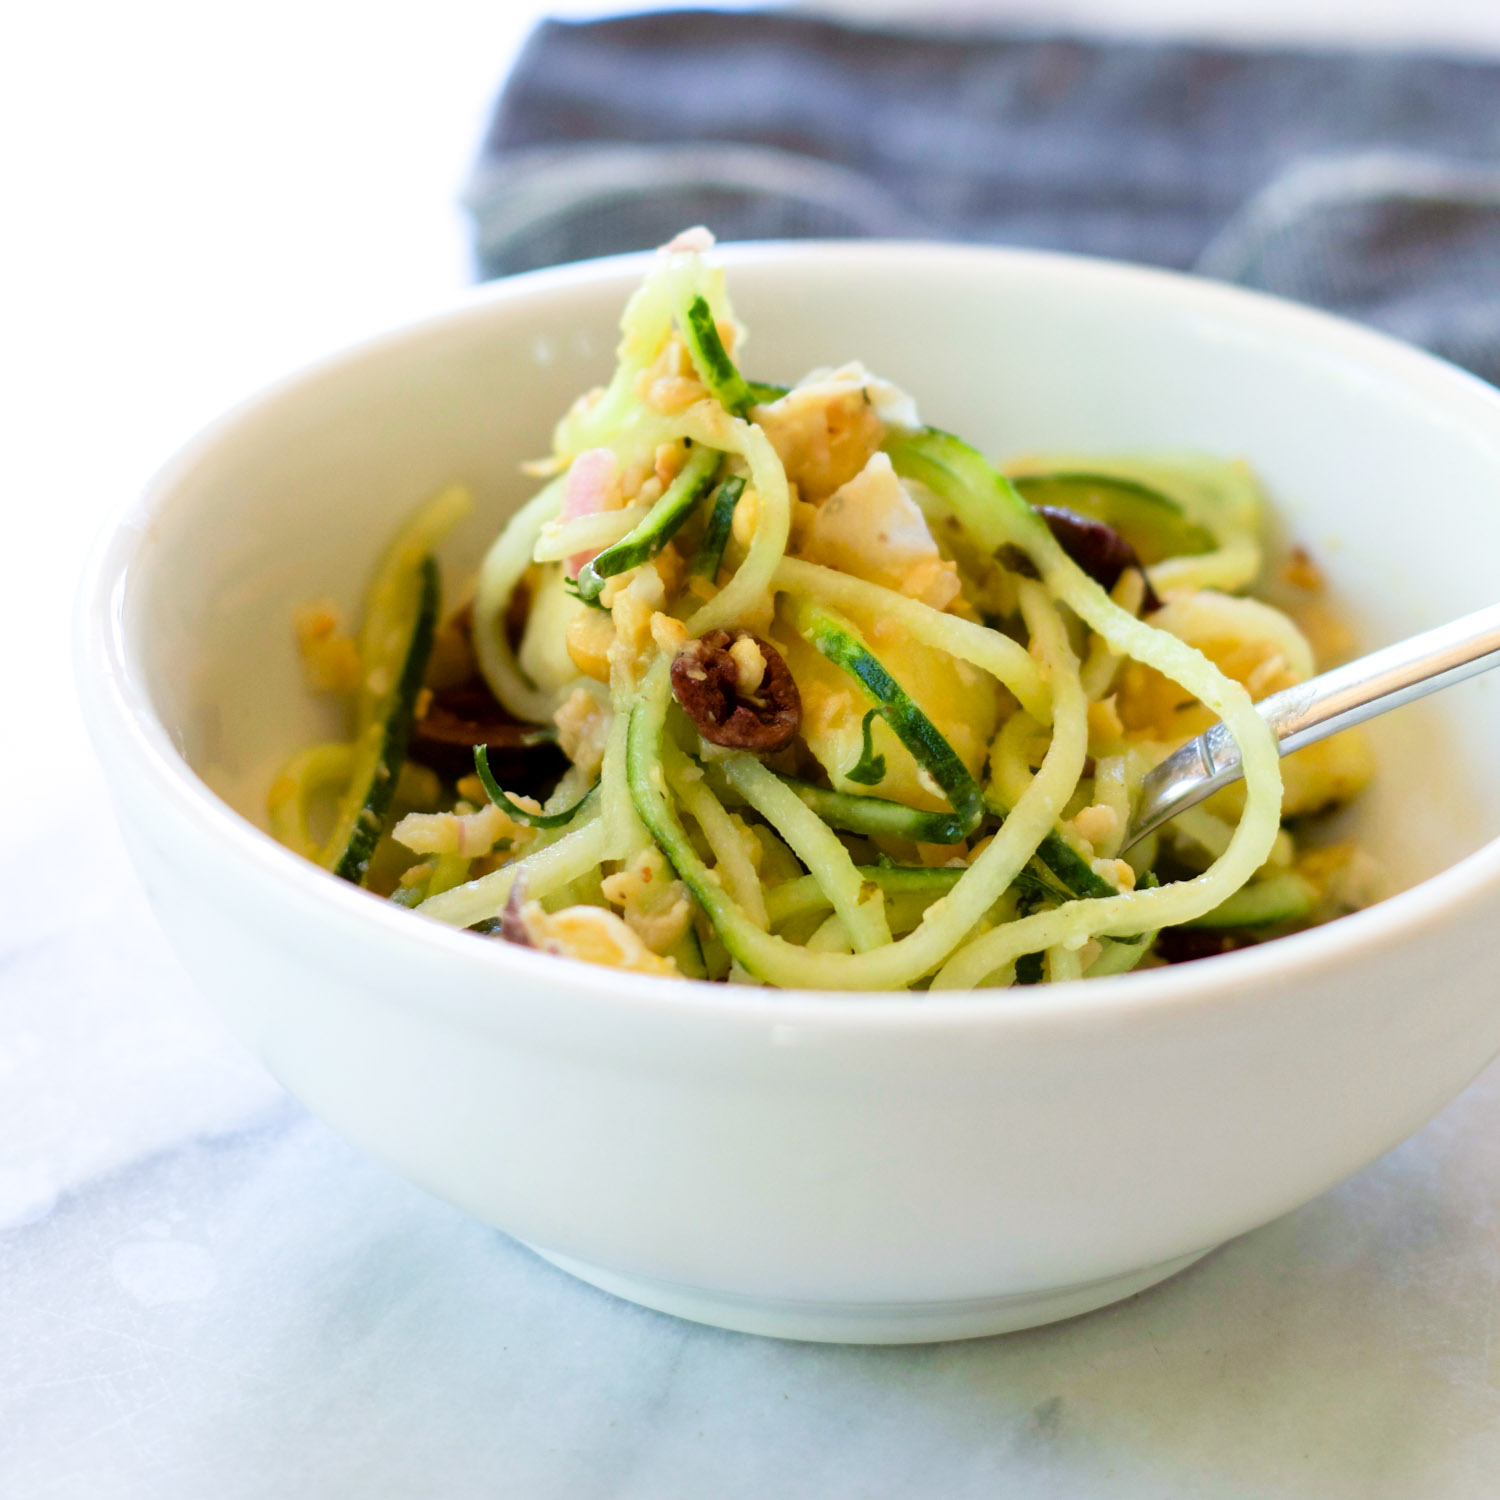 Nicoise-Inspired Salad with Spiralized Cucumber Noodles, by Beautiful Ingredient